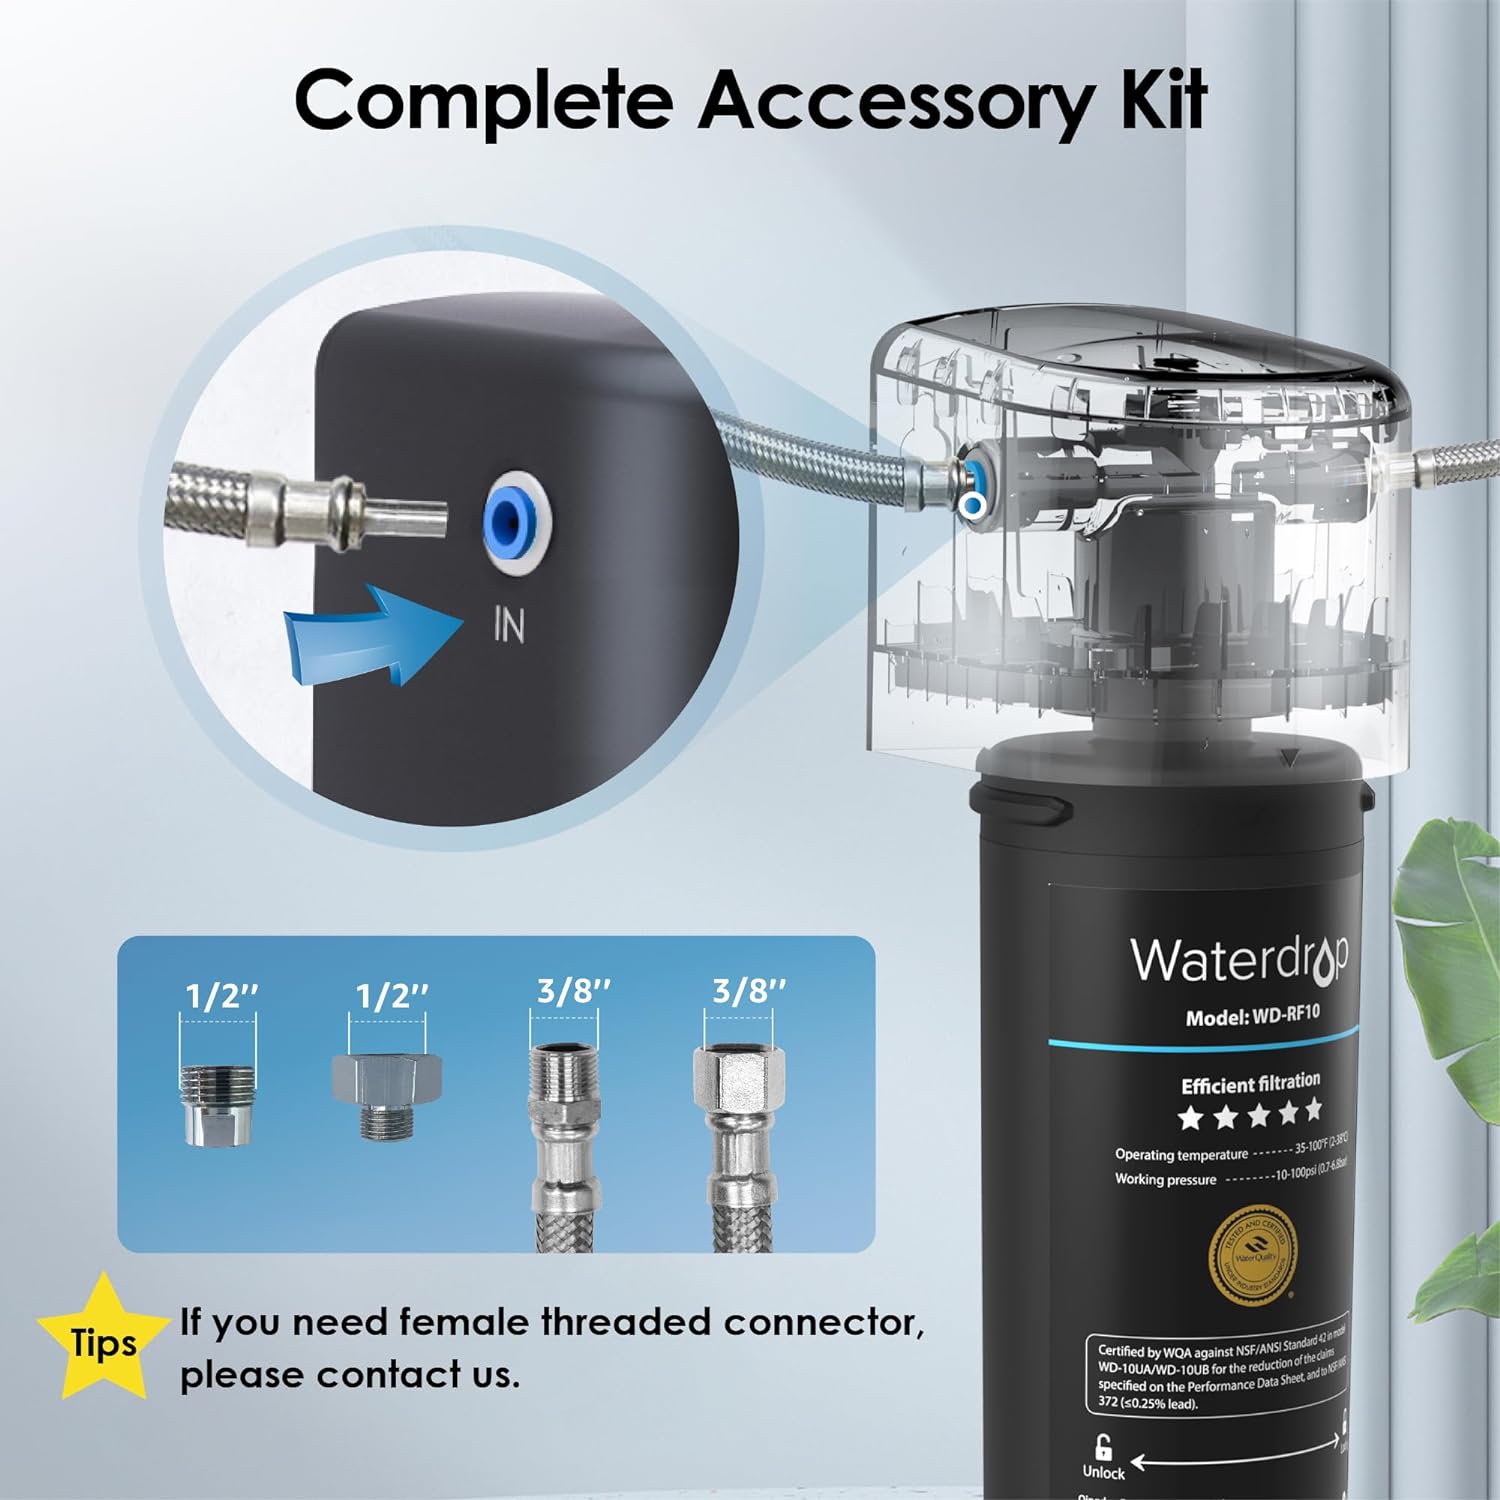 Waterdrop 10UA Under Sink Water Filter System, Reduces PFAS, PFOA/PFOS,  Lead, Chlorine, Bad Taste & Odor, Under Counter Water Filter Direct Connect  to Kitchen Faucet, NSF/ANSI 42 Certified, 8K Gallons